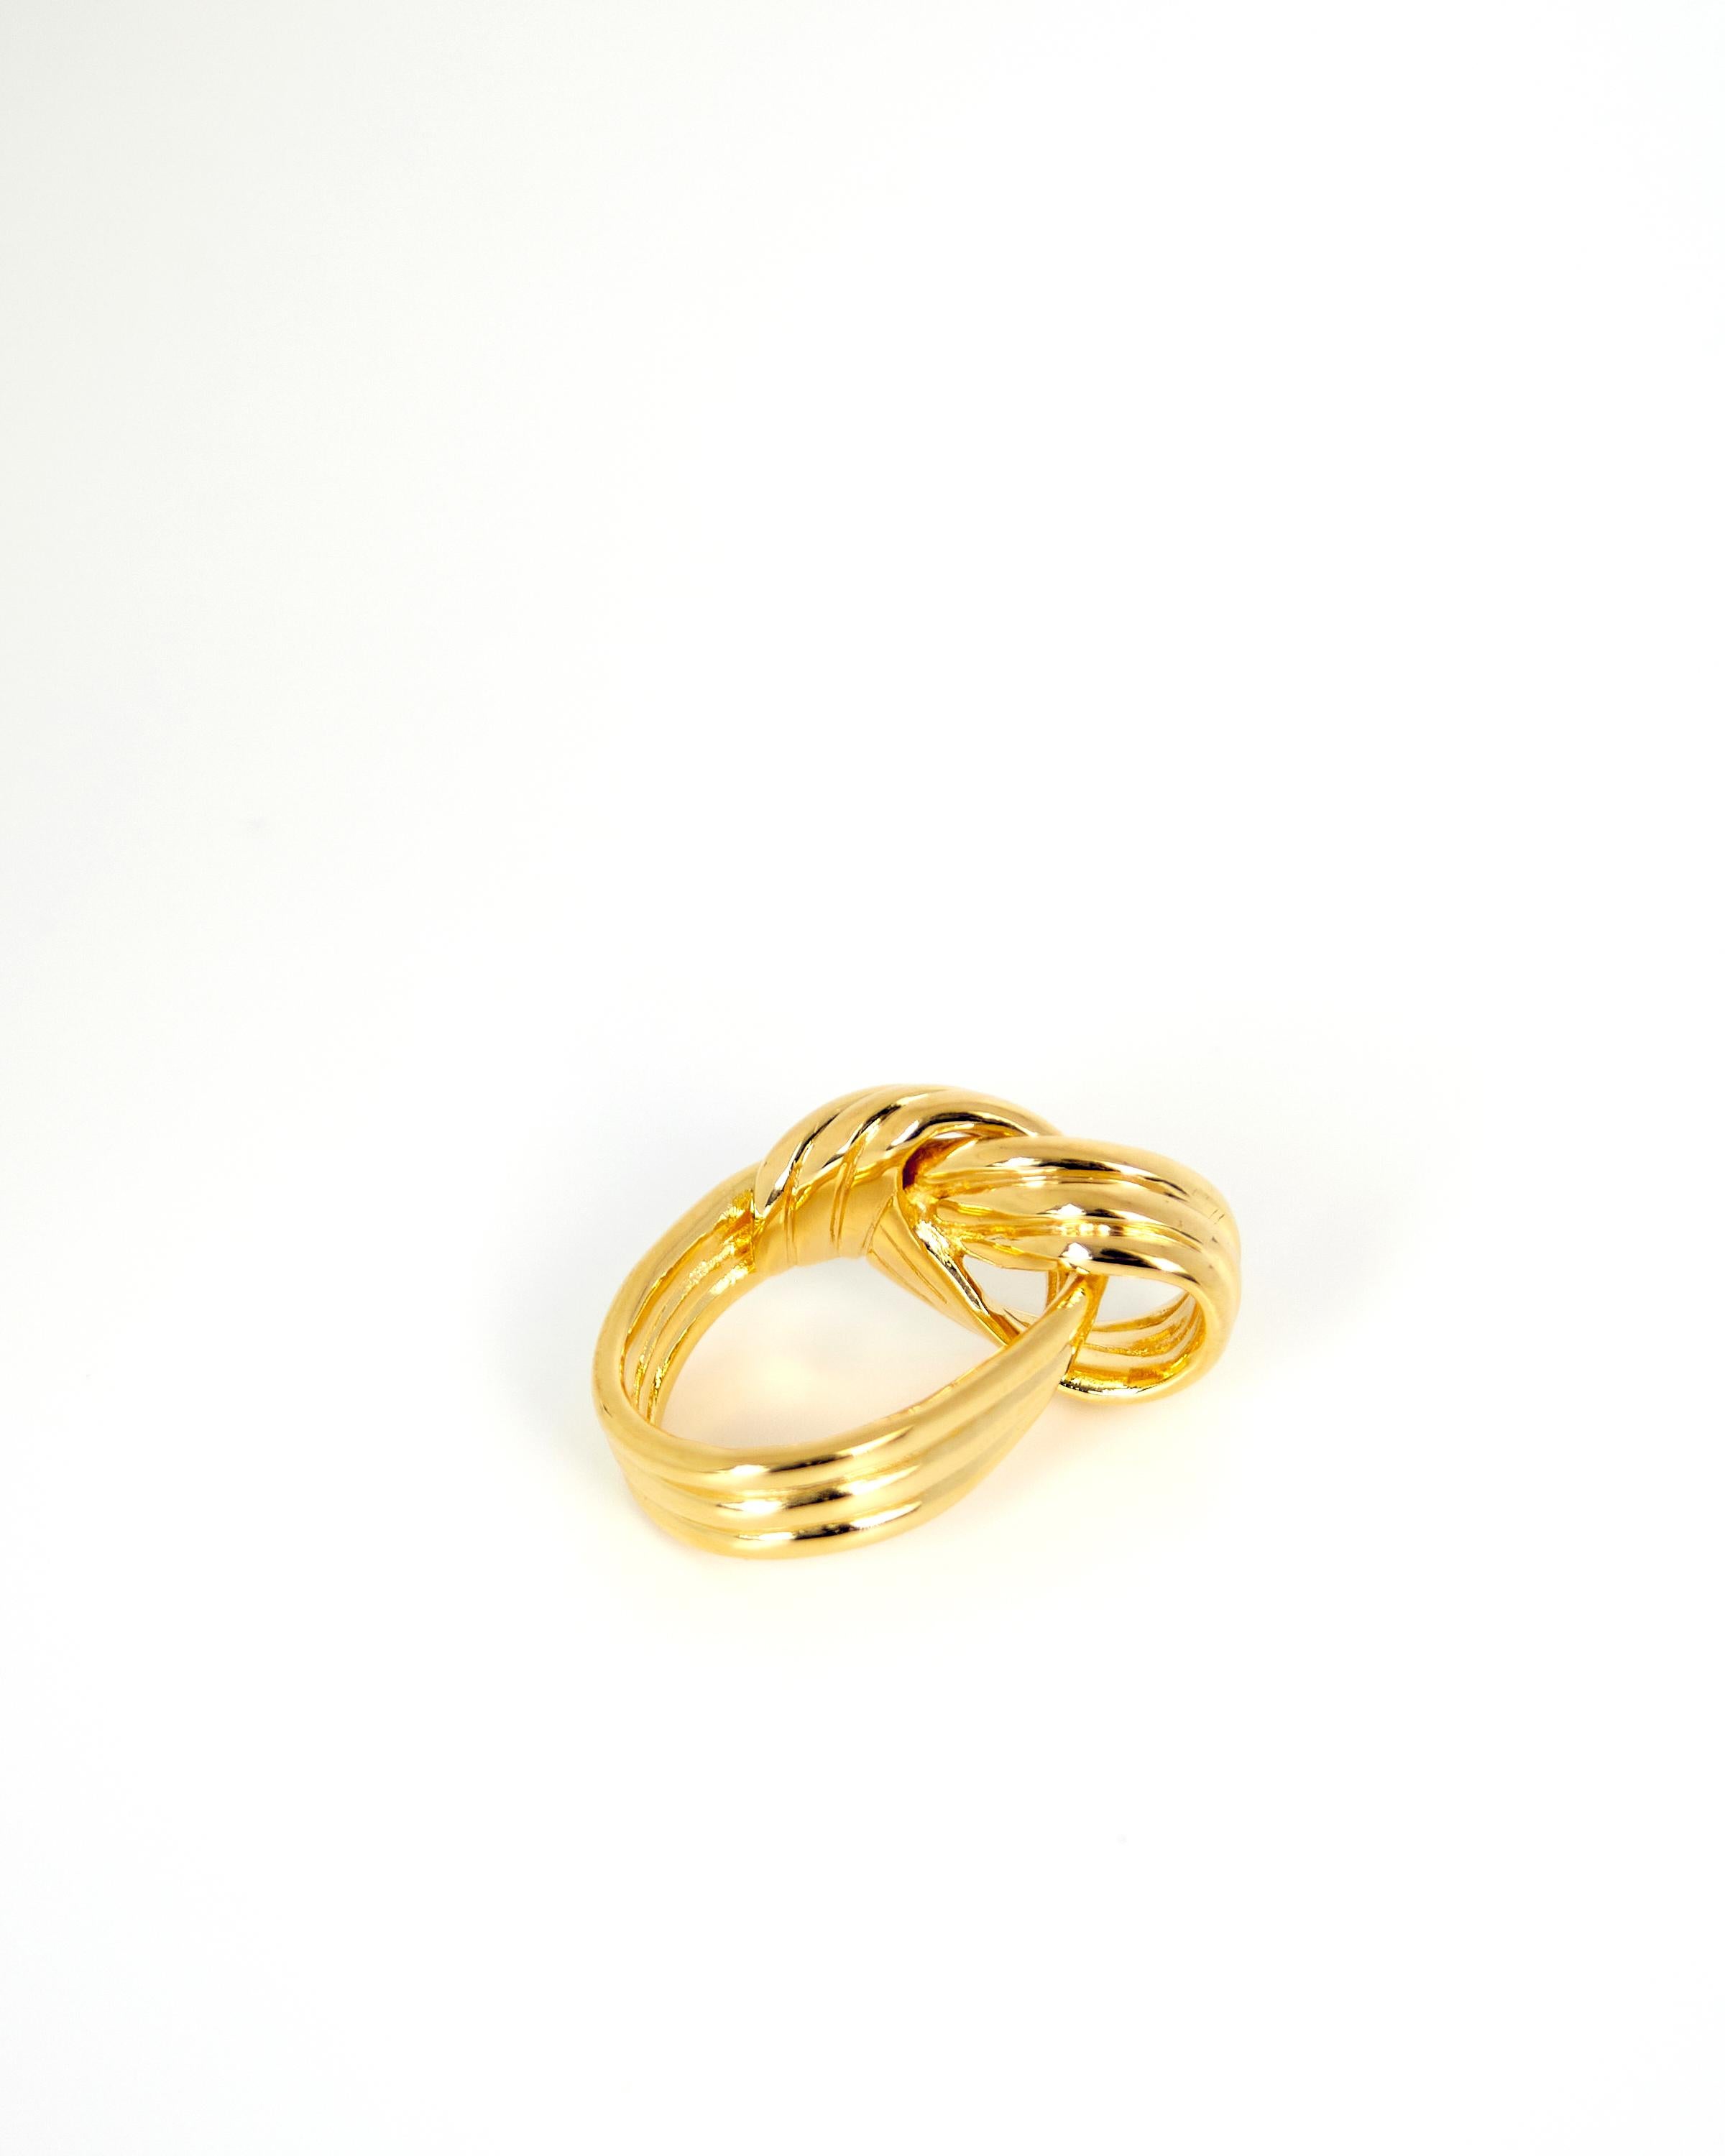 Women's or Men's 70s Inspired Braid Ring, 18 Carat Gold Plated (Medium) For Sale